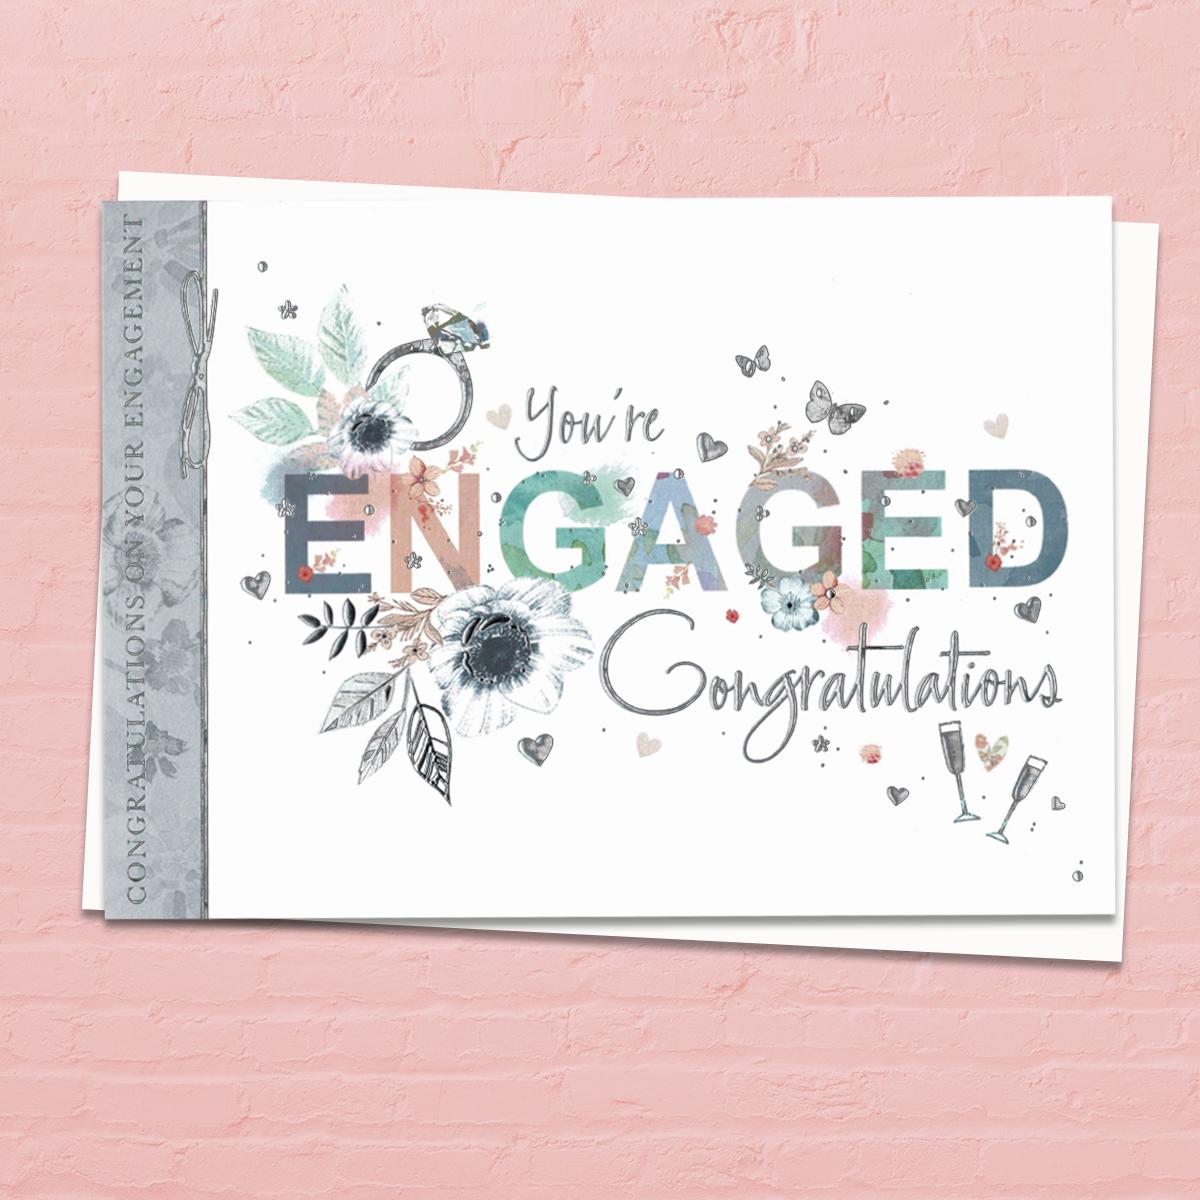 You're Engaged Congratulations' Card. This 'Landscape' Card Features A Diamond Ring with Beautiful Floral Adorned Letters Of 'Engagement' . With Beautiful Silver Foil Detail And White Envelope